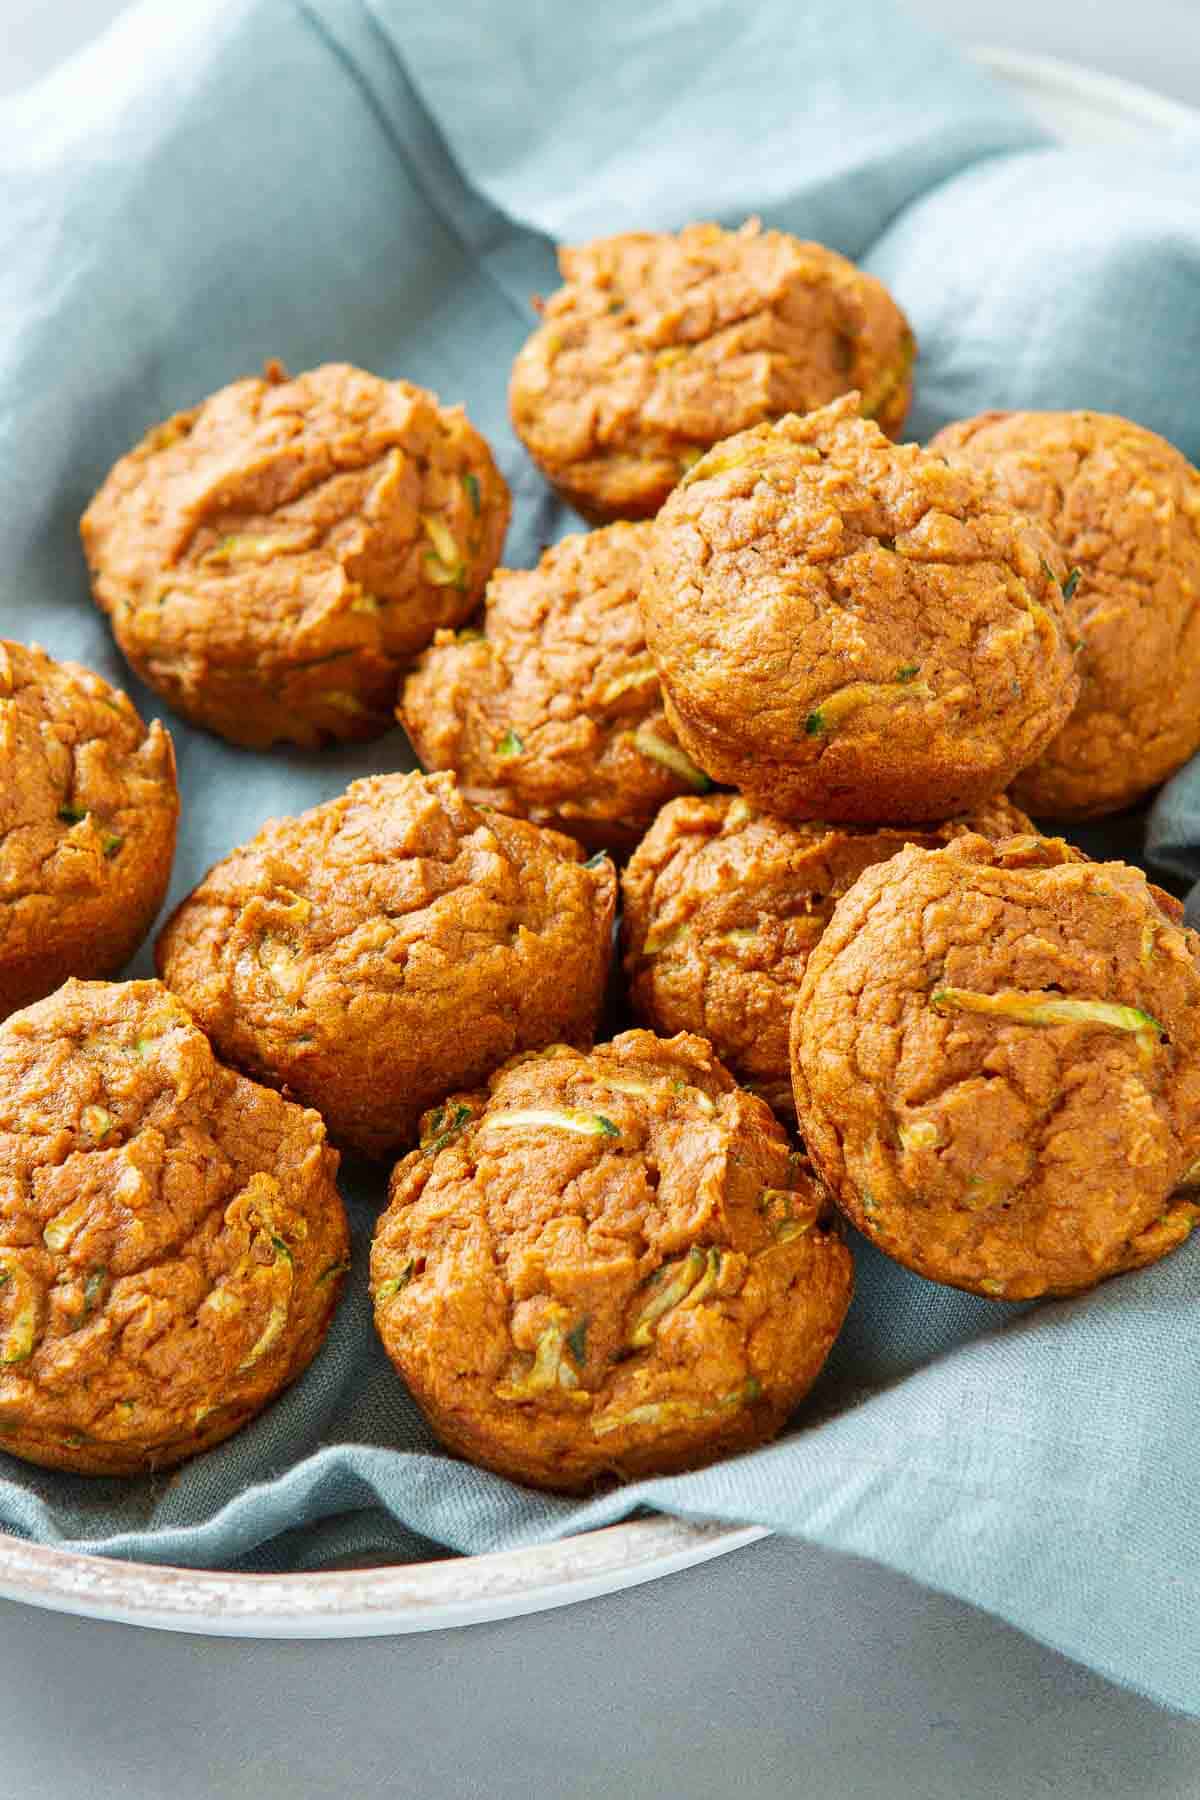 Zucchini pumpkin muffins on a white tray with a light blue napkin.